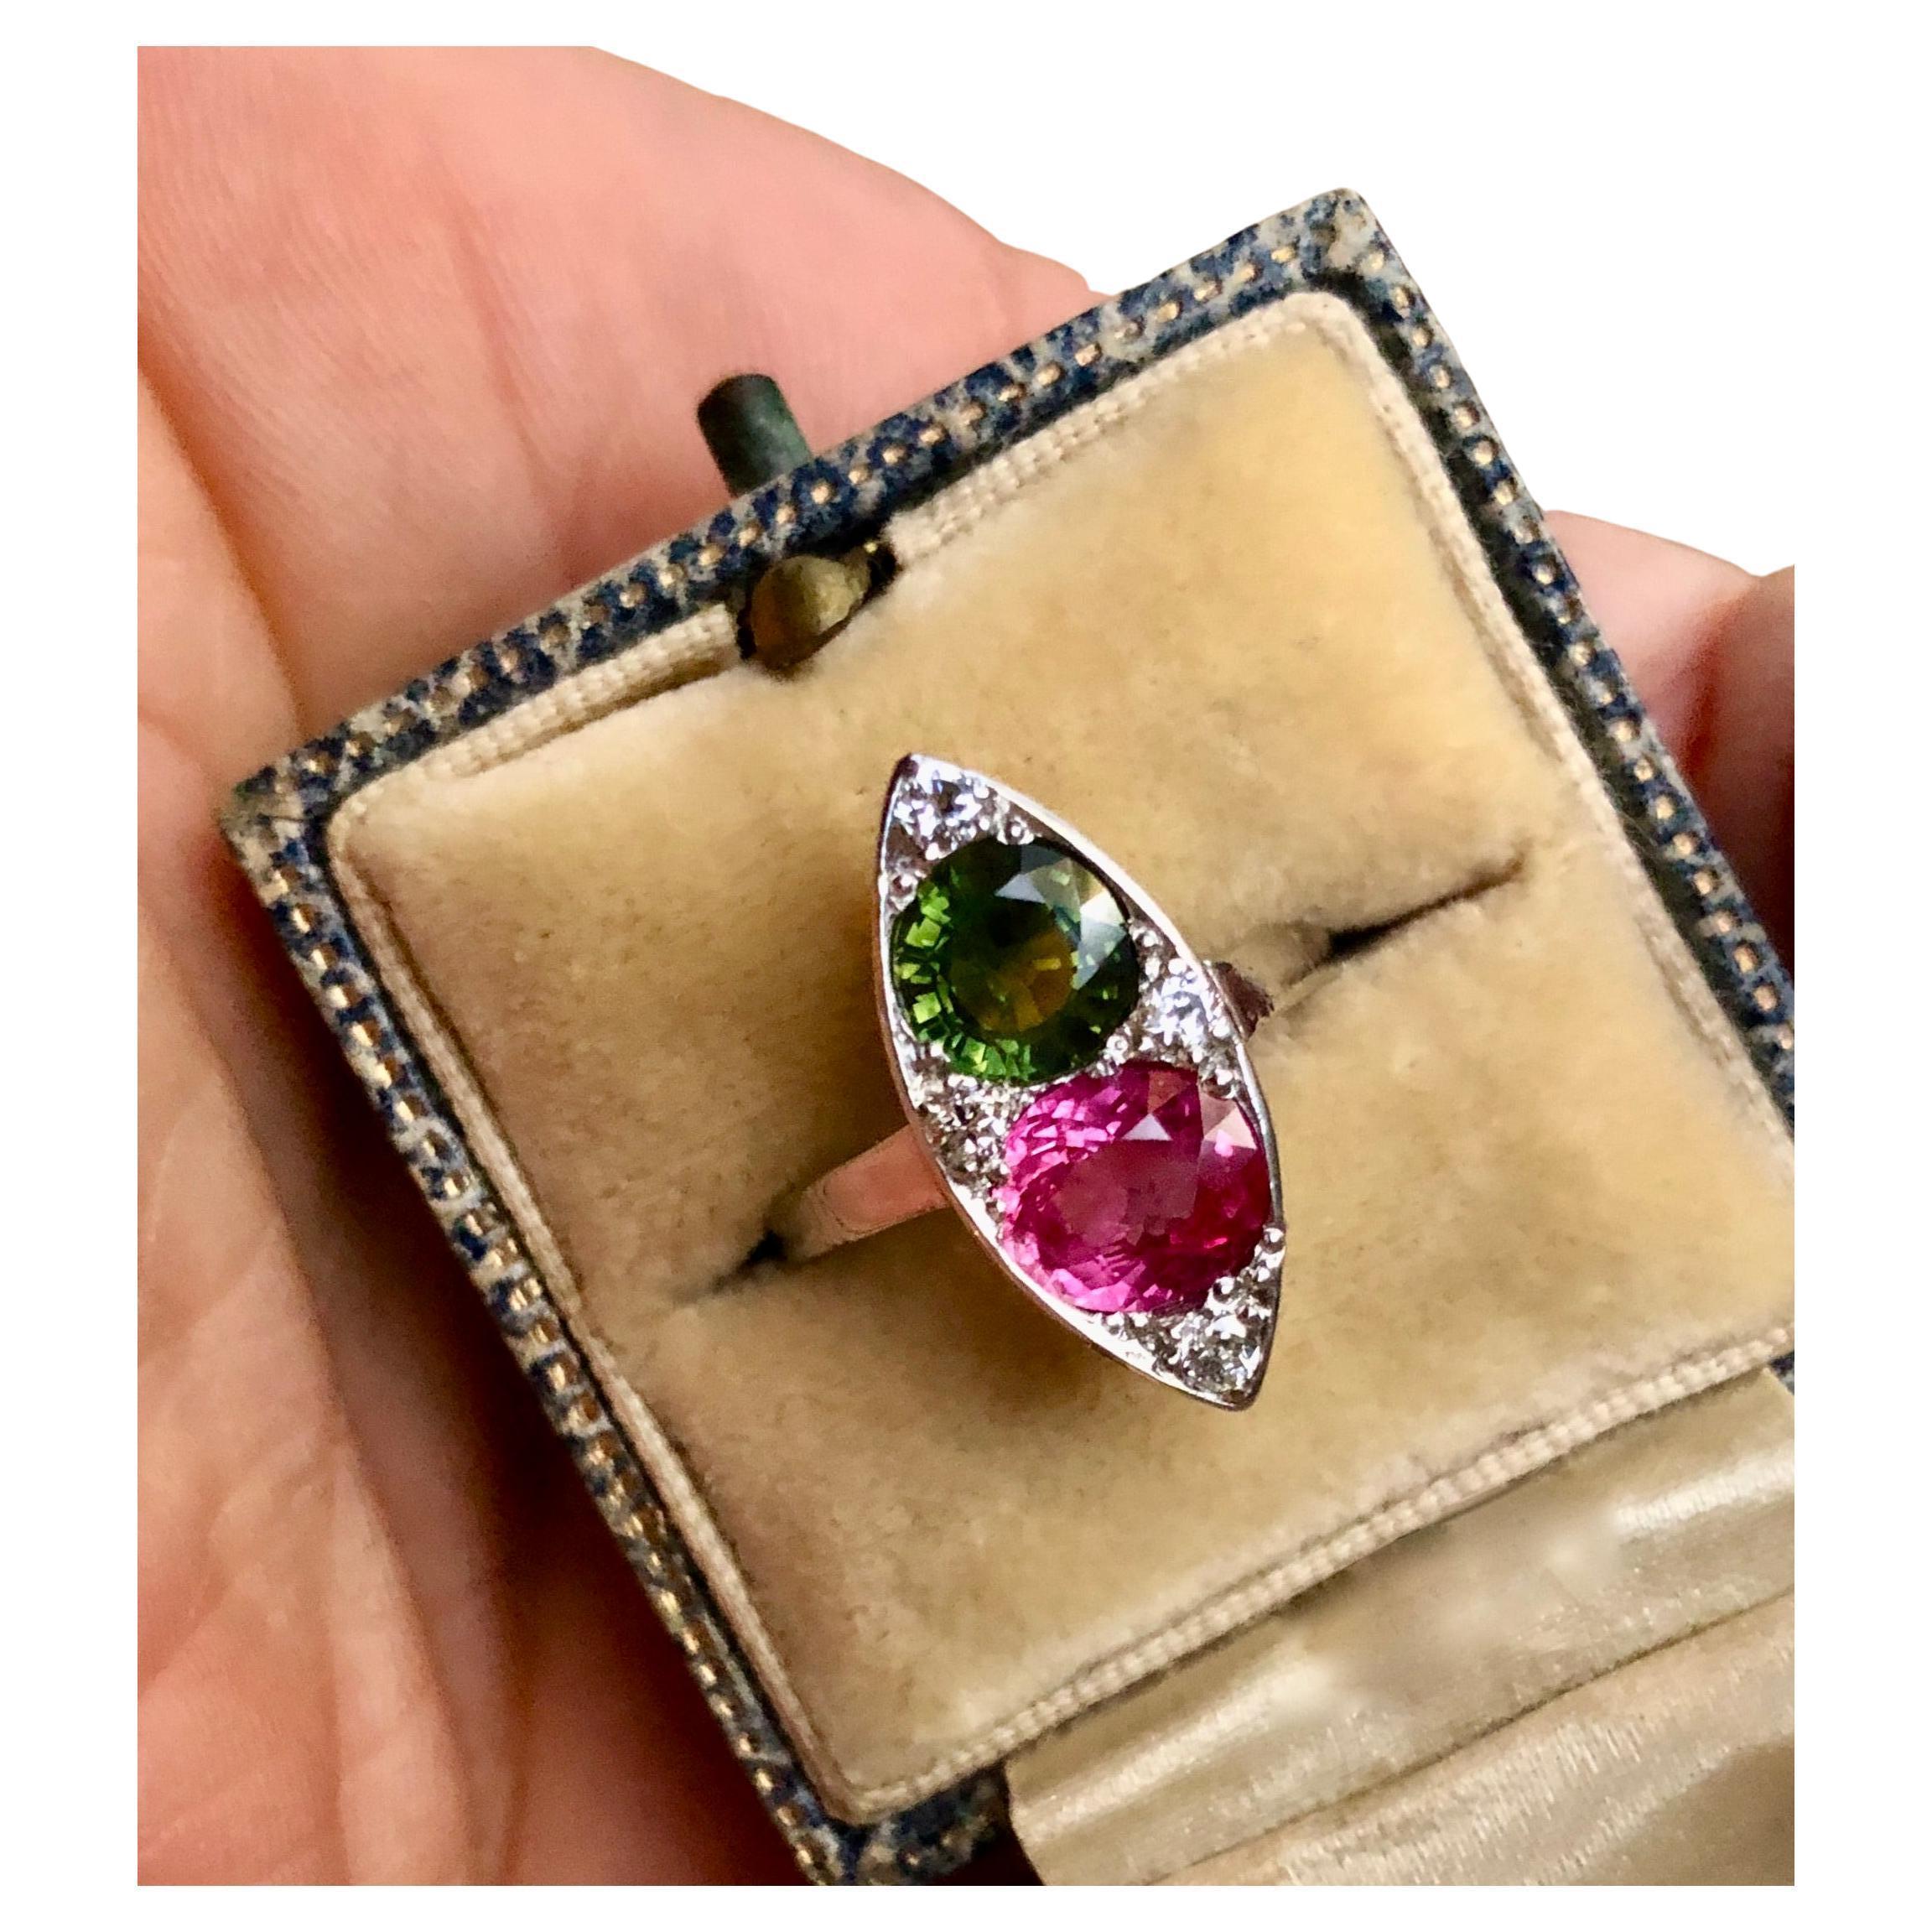 An Antique  Art Deco Style natural Ruby and Sapphire Platinum Navette Ring.  The ring is accented with one, round old cut pinkish red untreated natural ruby, one round cut green natural sapphire, and four, bead set, round single cut white diamonds.